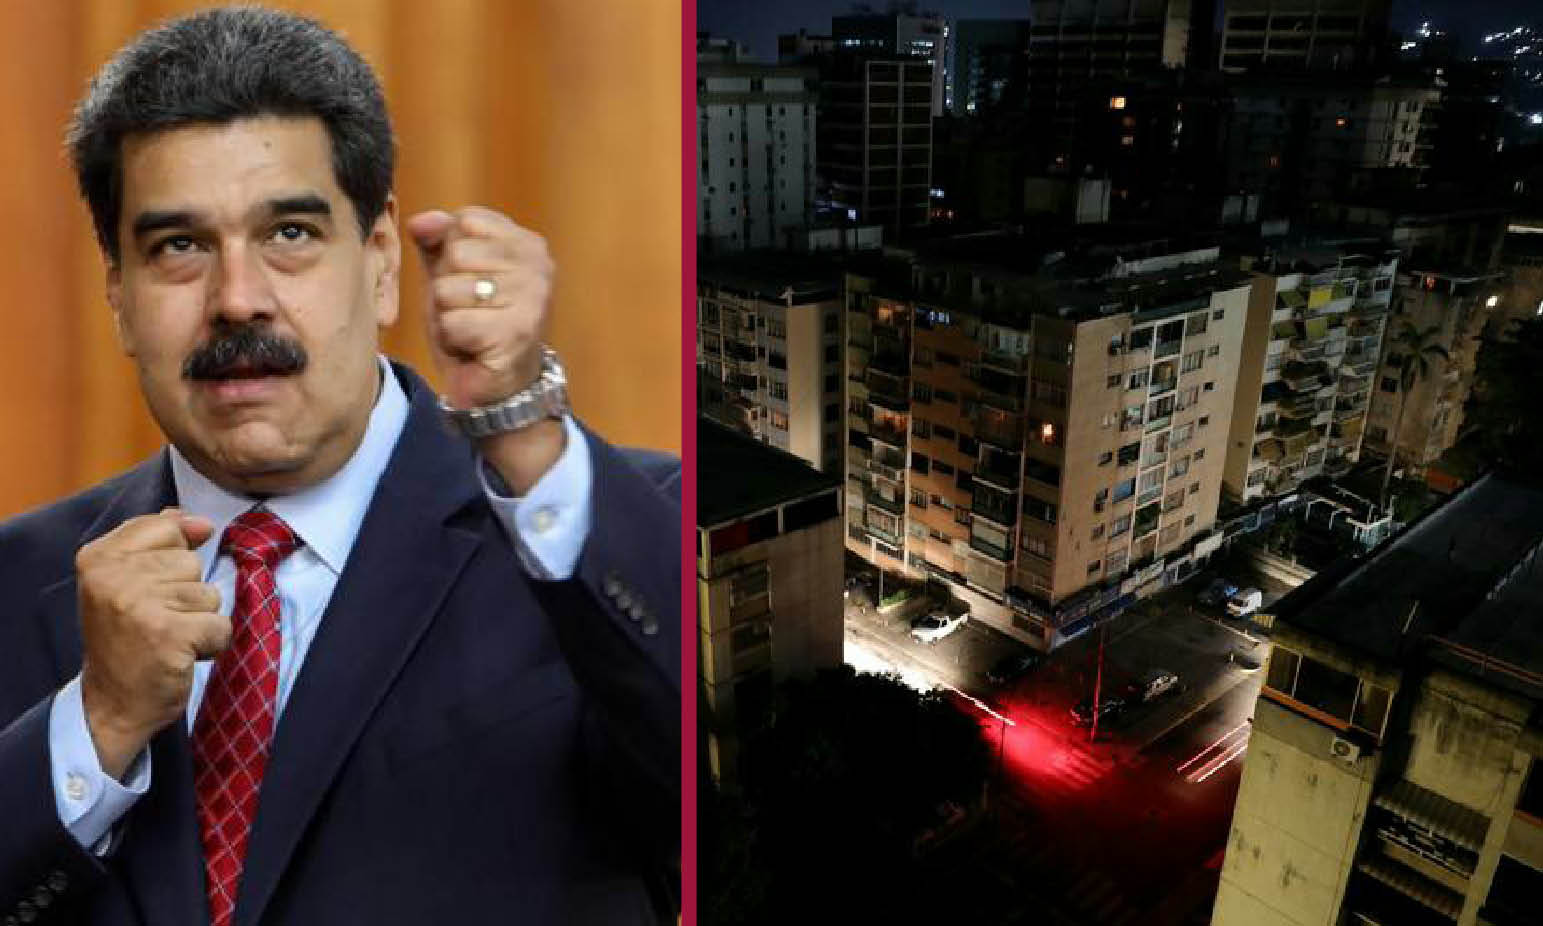 ELECTROMAGNETIC ATTACK: ANOTHER BLACKOUT IN VENEZUELA